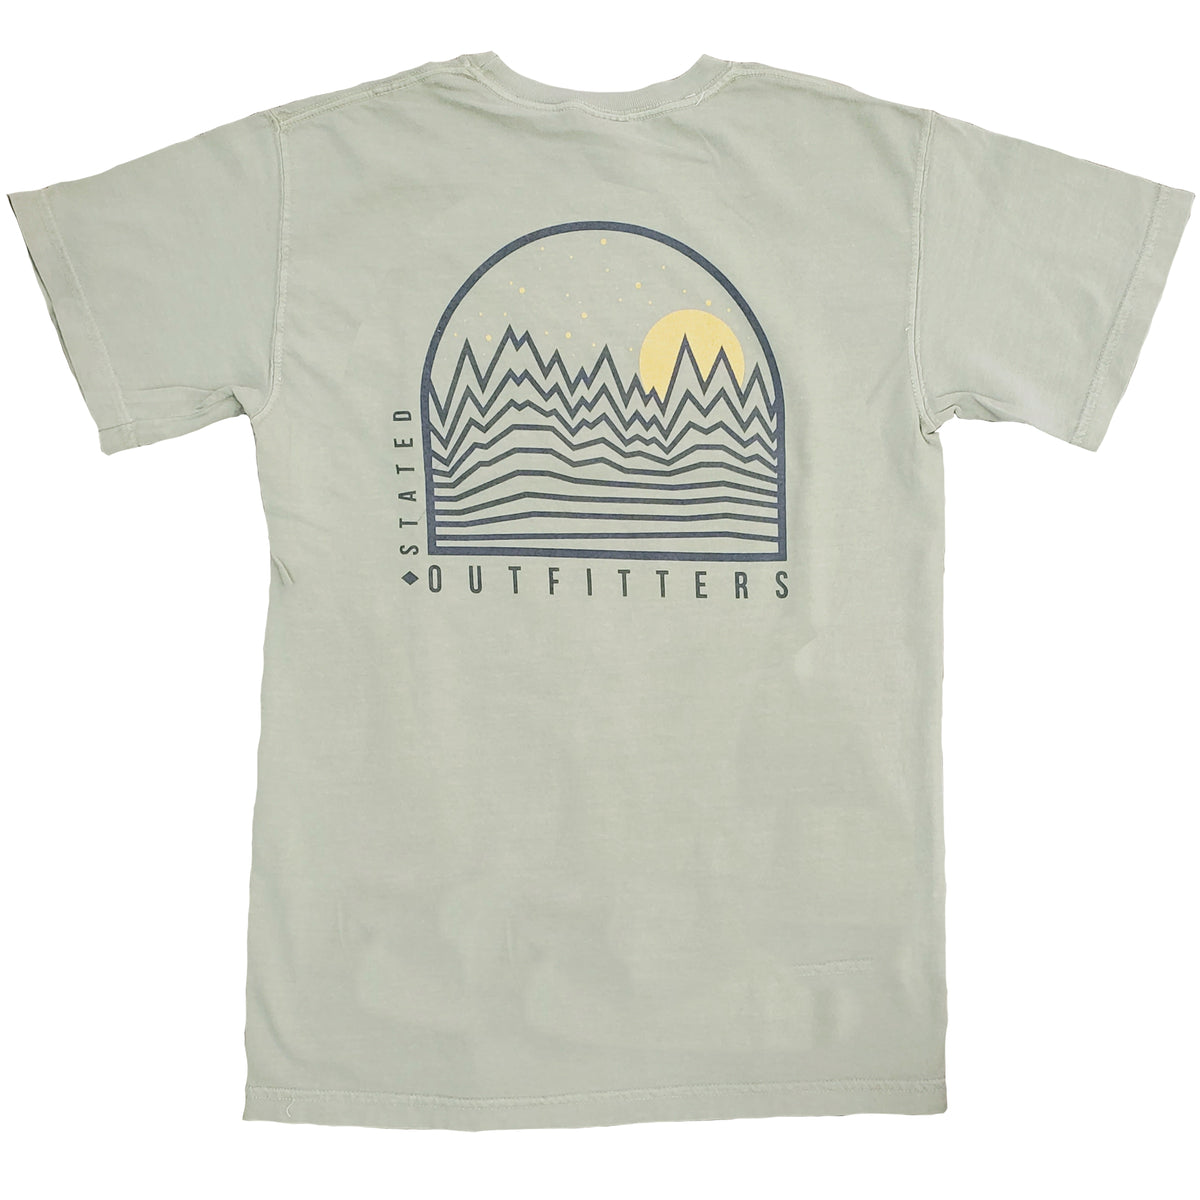 Stated Outfitters Horizons Tee